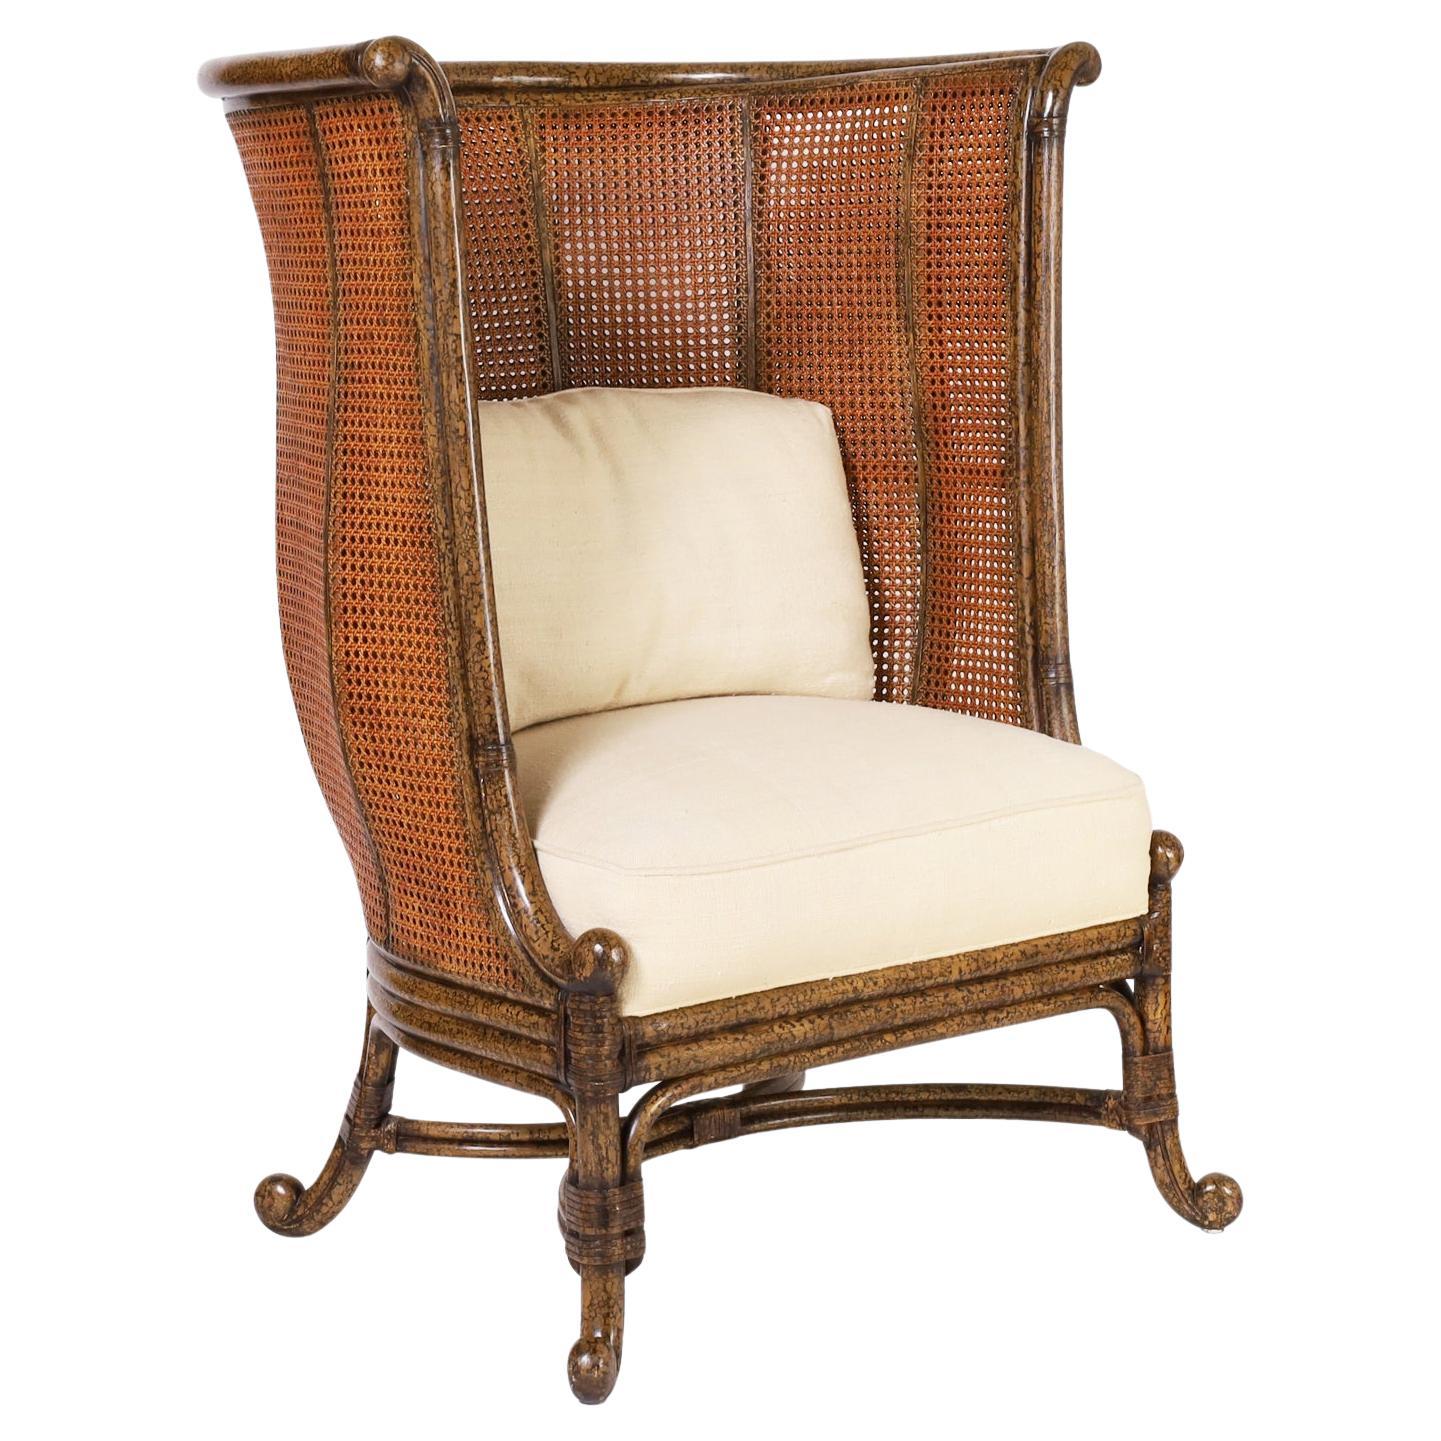 Maitland-Smith British Colonial Style Wingback Chair